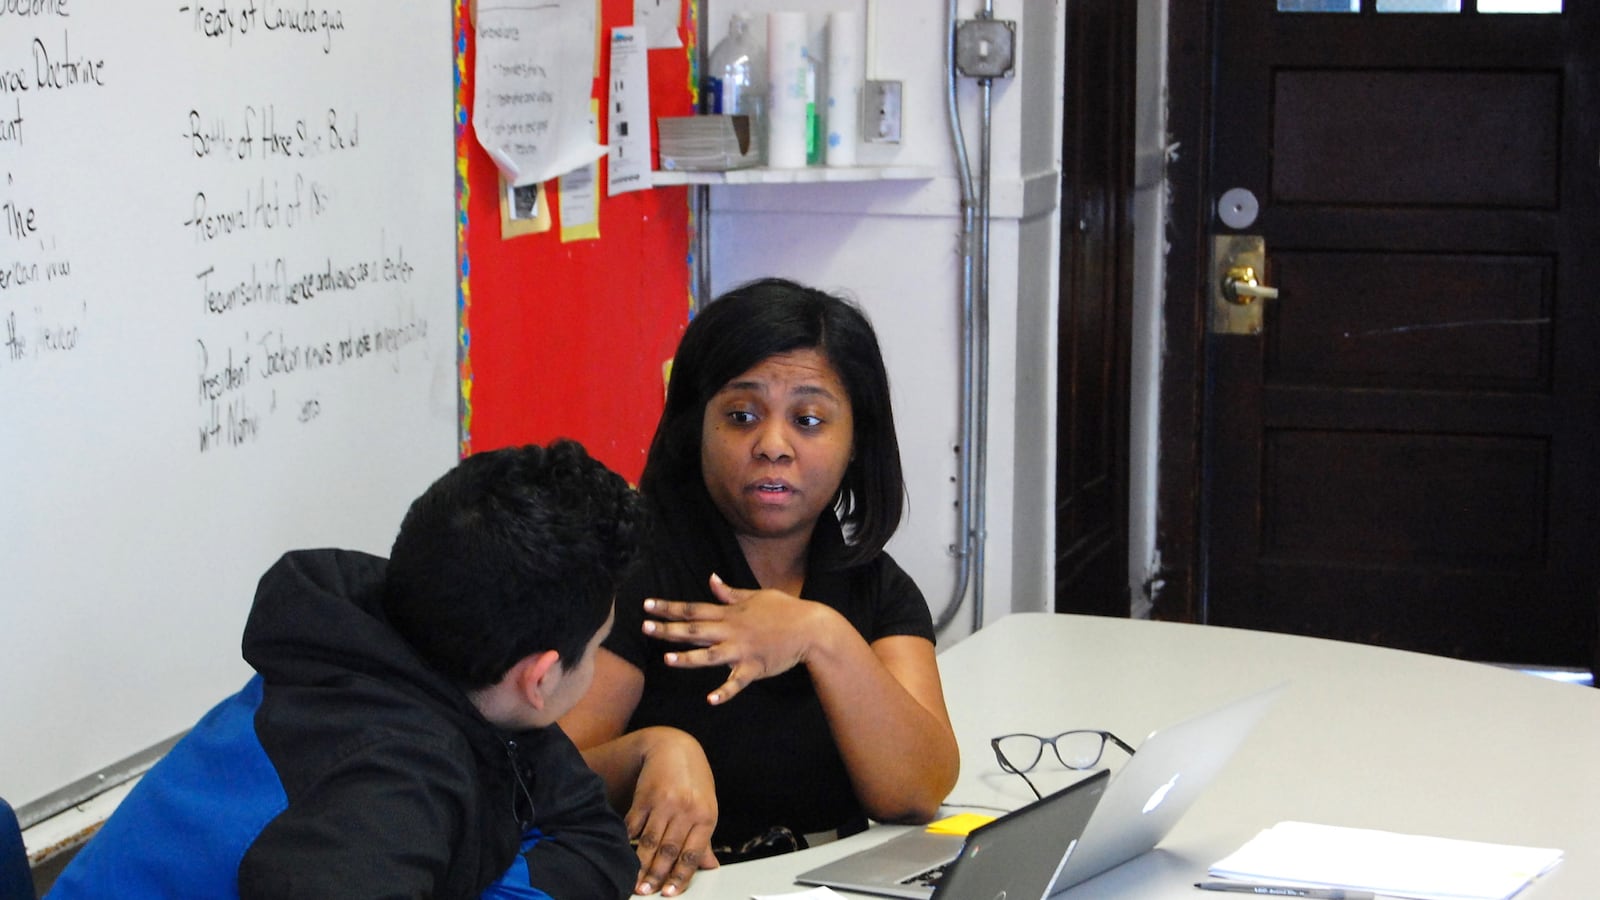 Eighth-grade teacher Traci McCullough meets one-on-one with a student in February 2020 as part of a mentoring session at Chicago International Charter School Bucktown, an early adopter of the Summit Learning program.